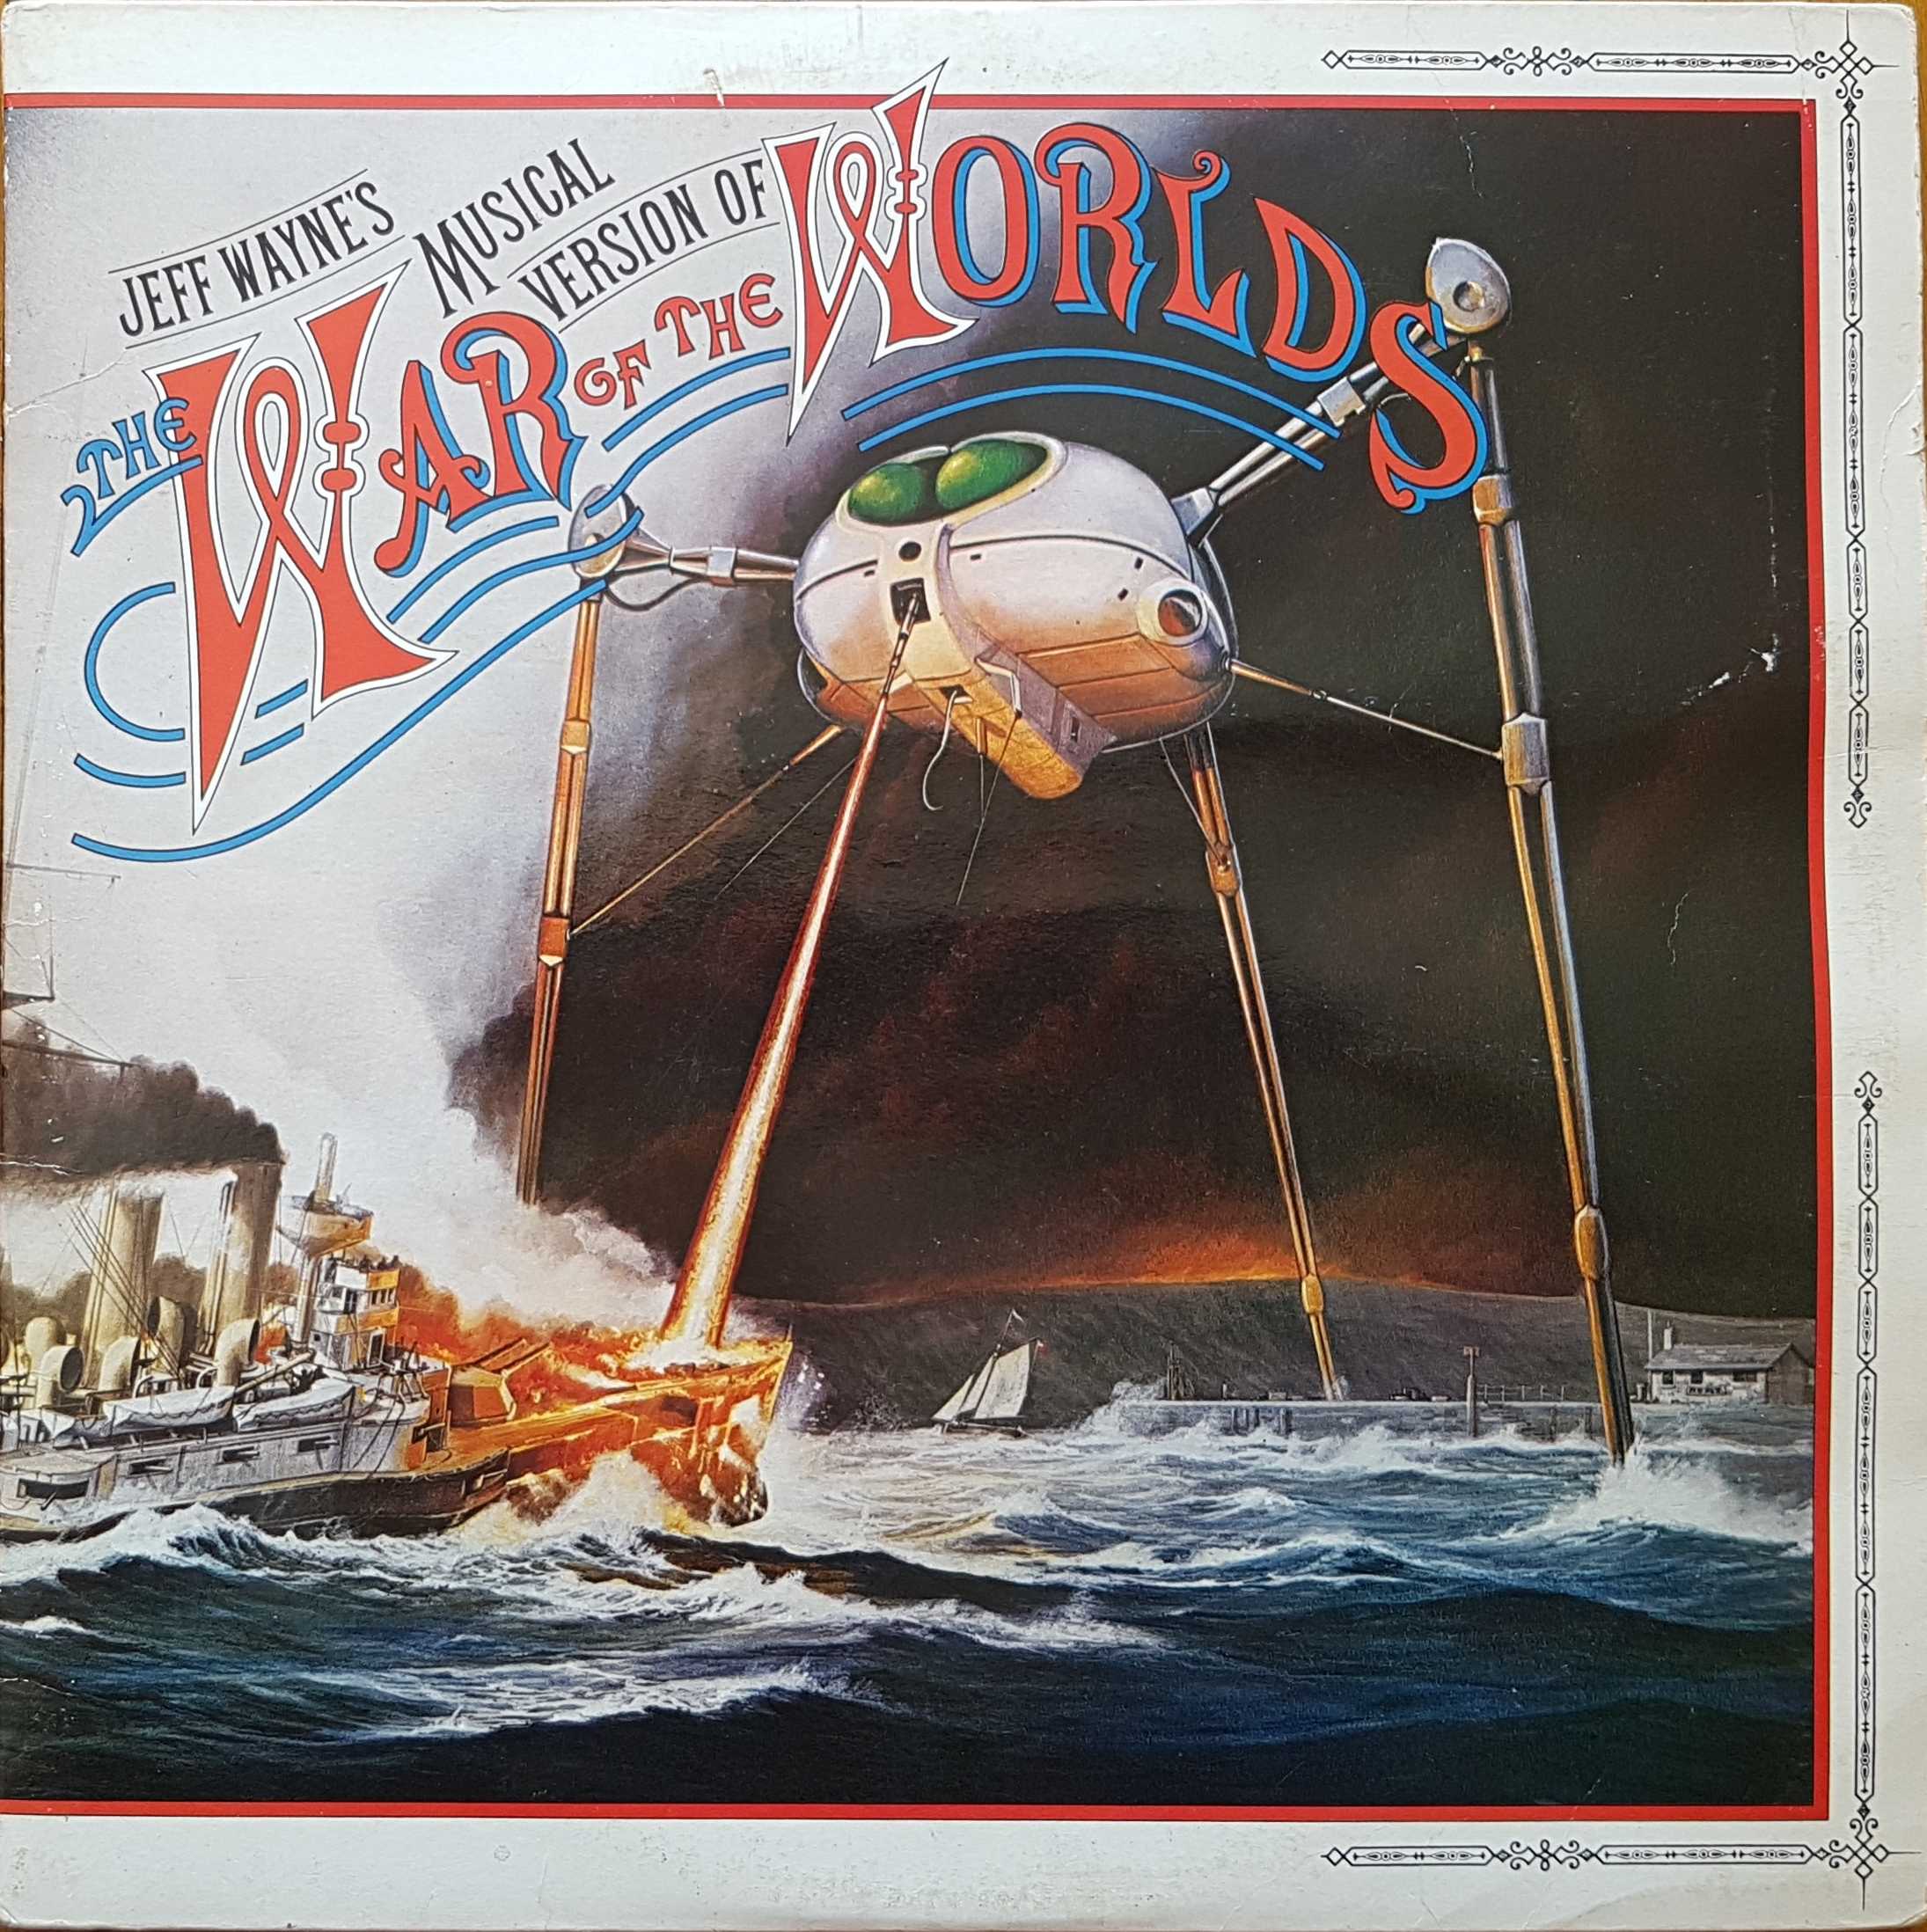 Picture of War of the Worlds by artist Jeff Wayne from ITV, Channel 4 and Channel 5 albums library